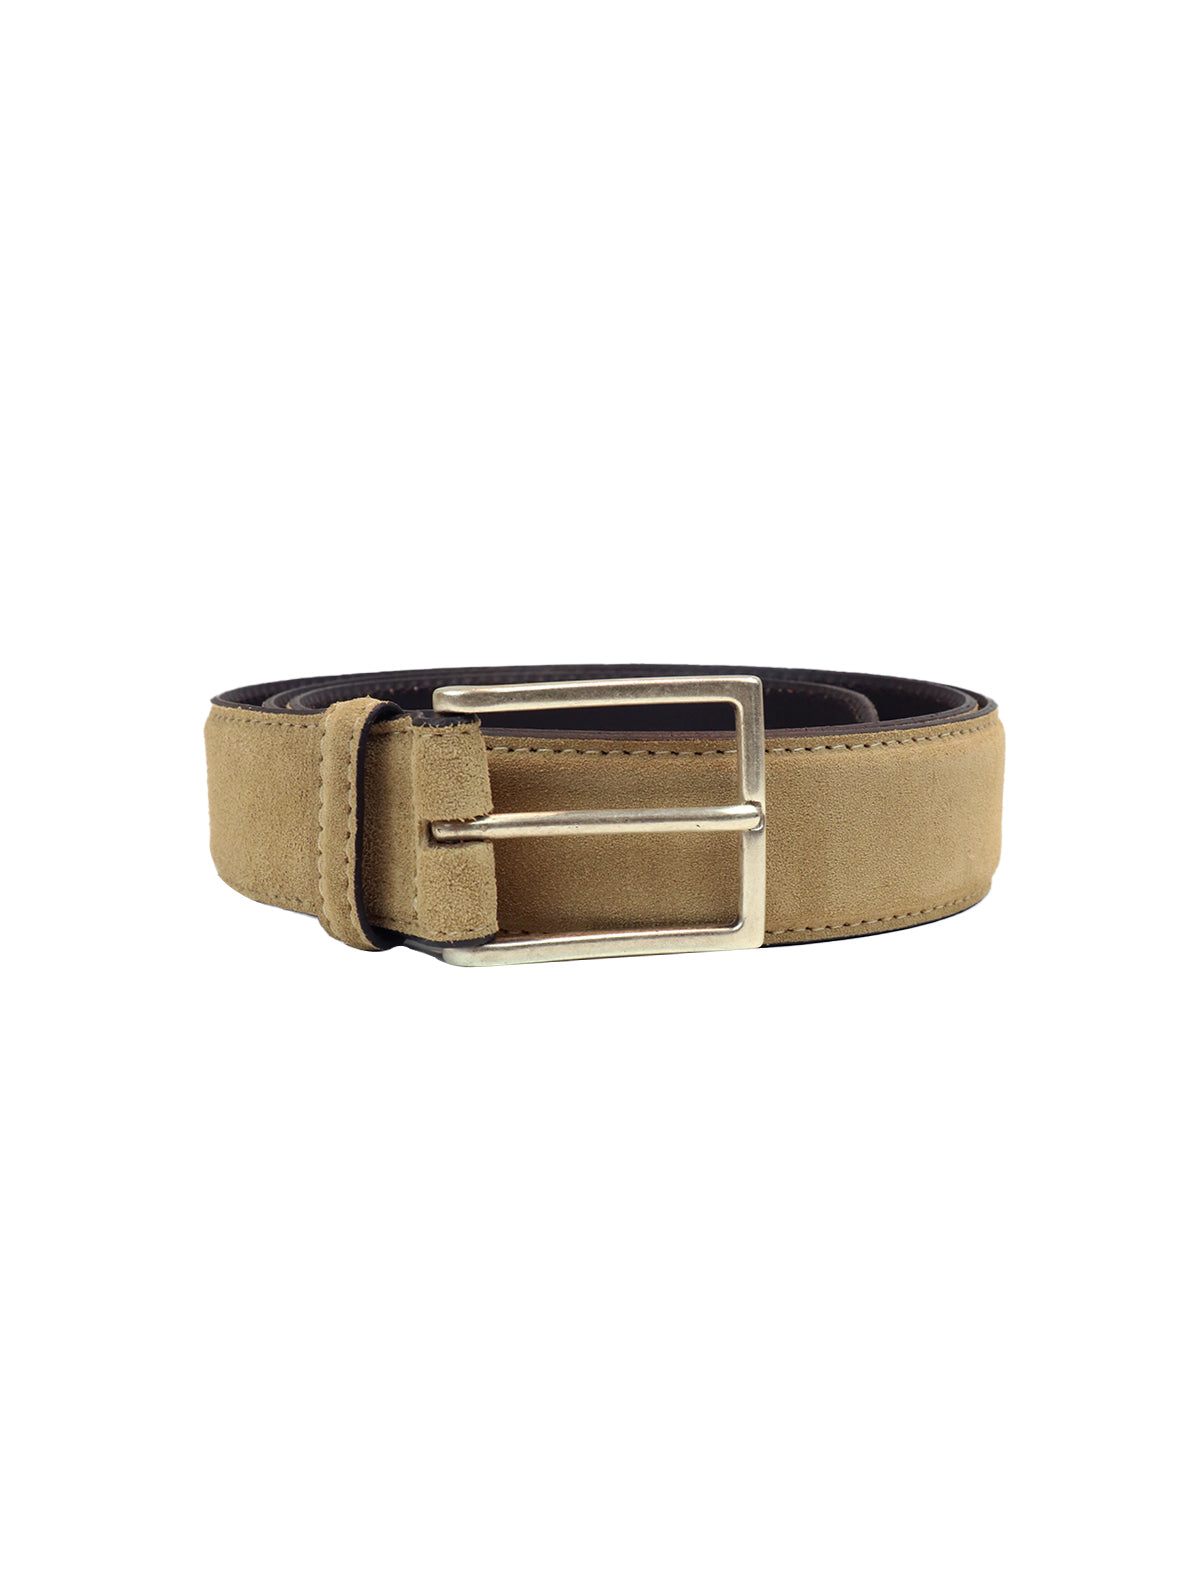 Andrea d'Amico Suede Belt in Beige